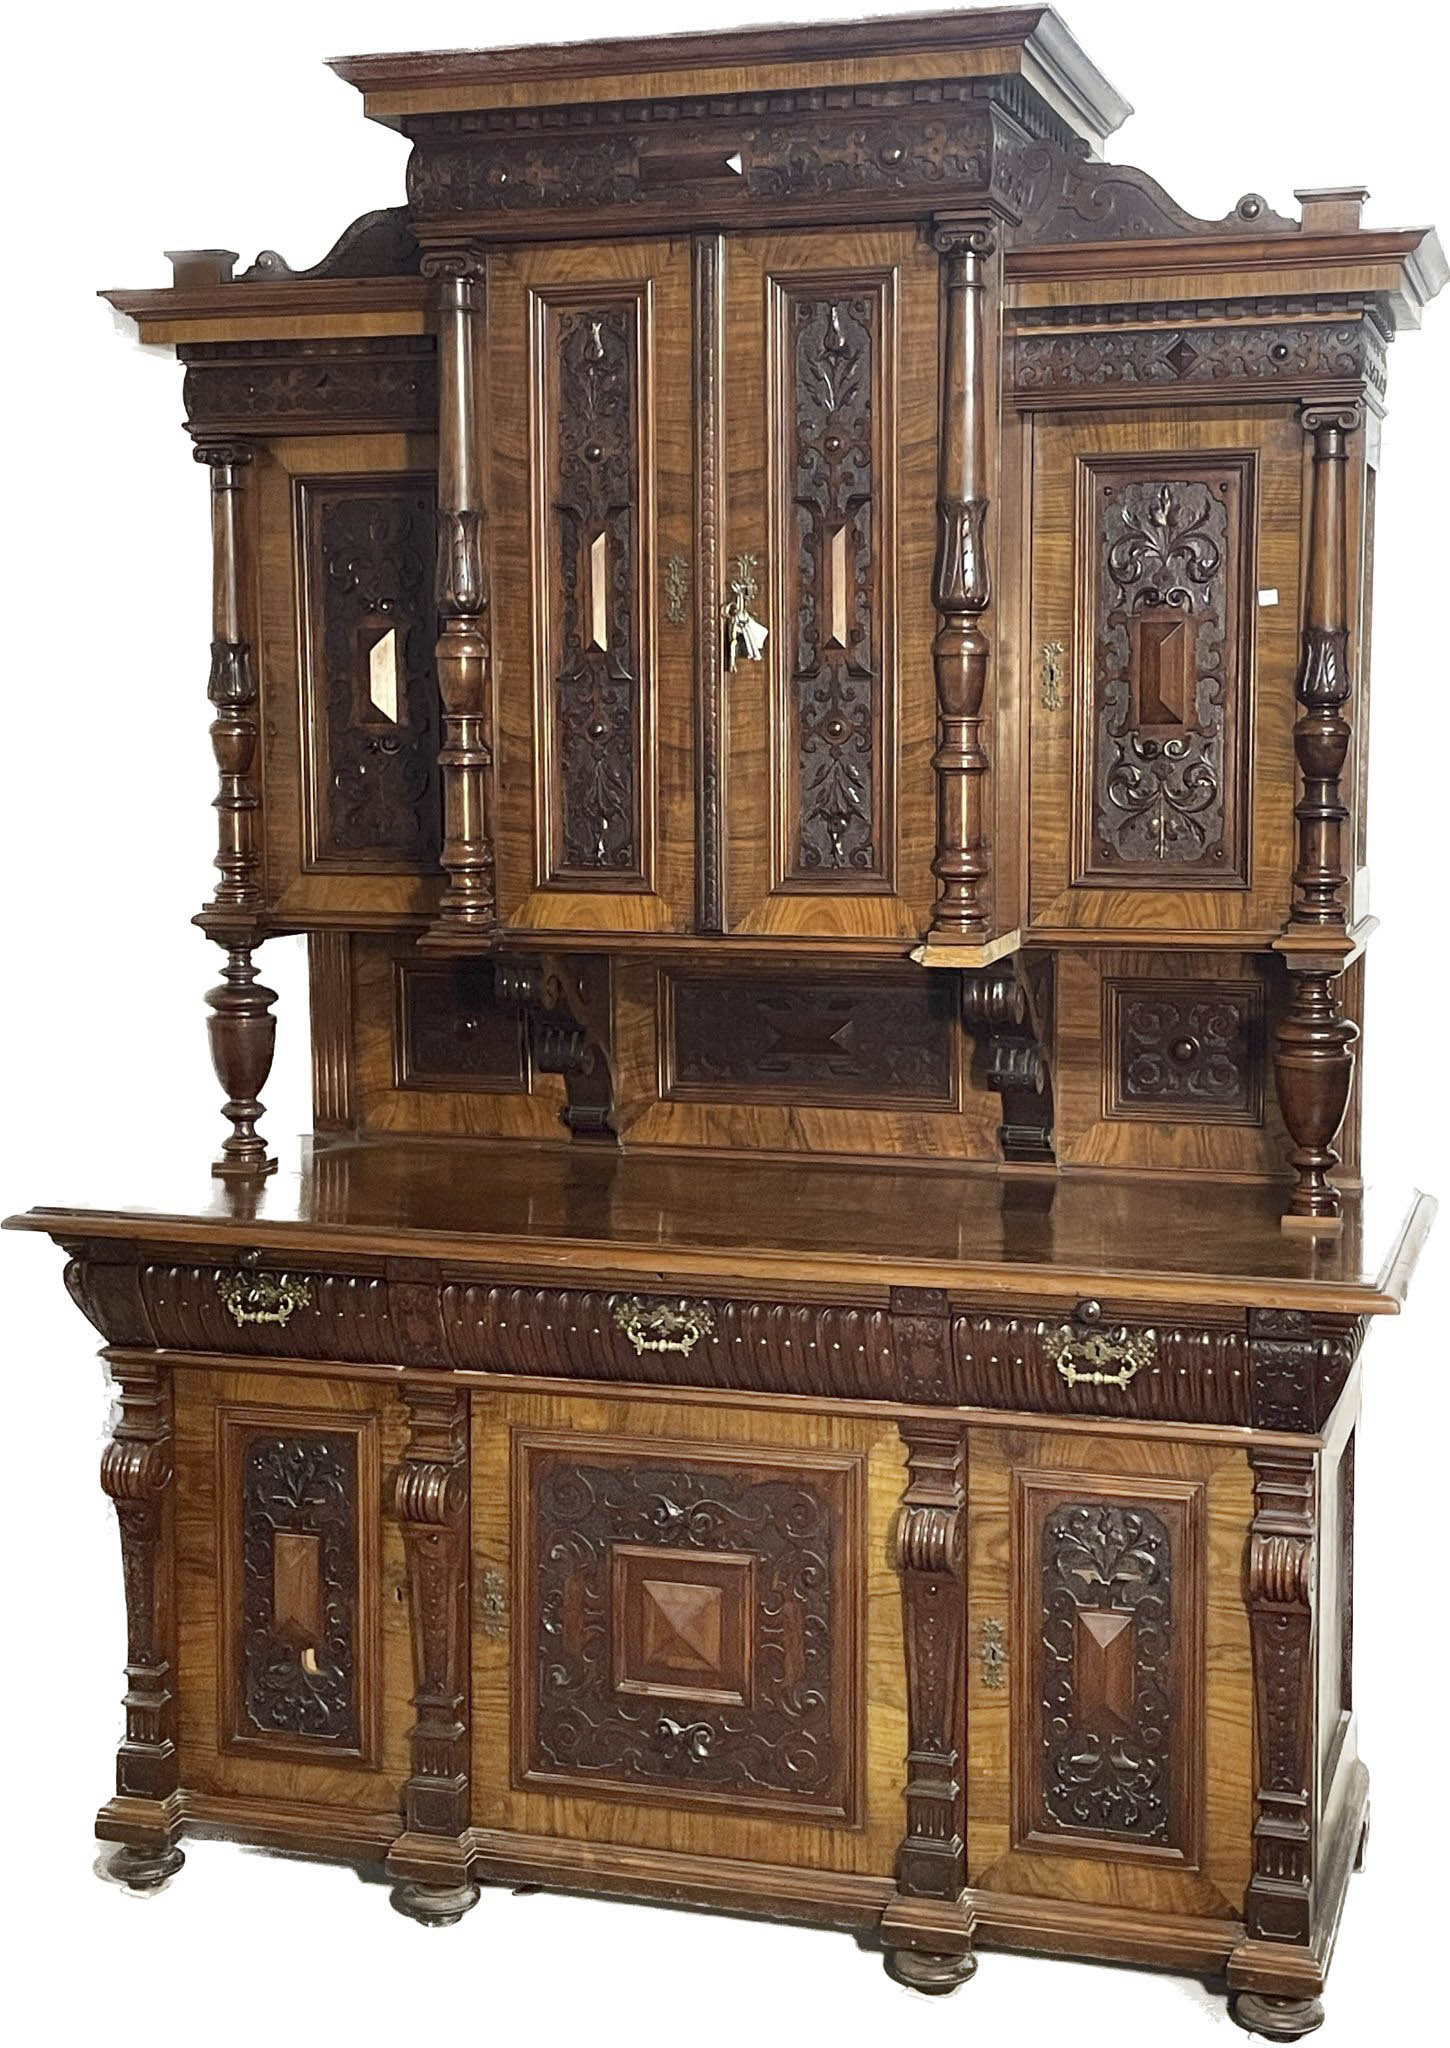 Founder's period buffet around 1880/90, walnut solid and veneered, richly carved, 245 x 180 x 75